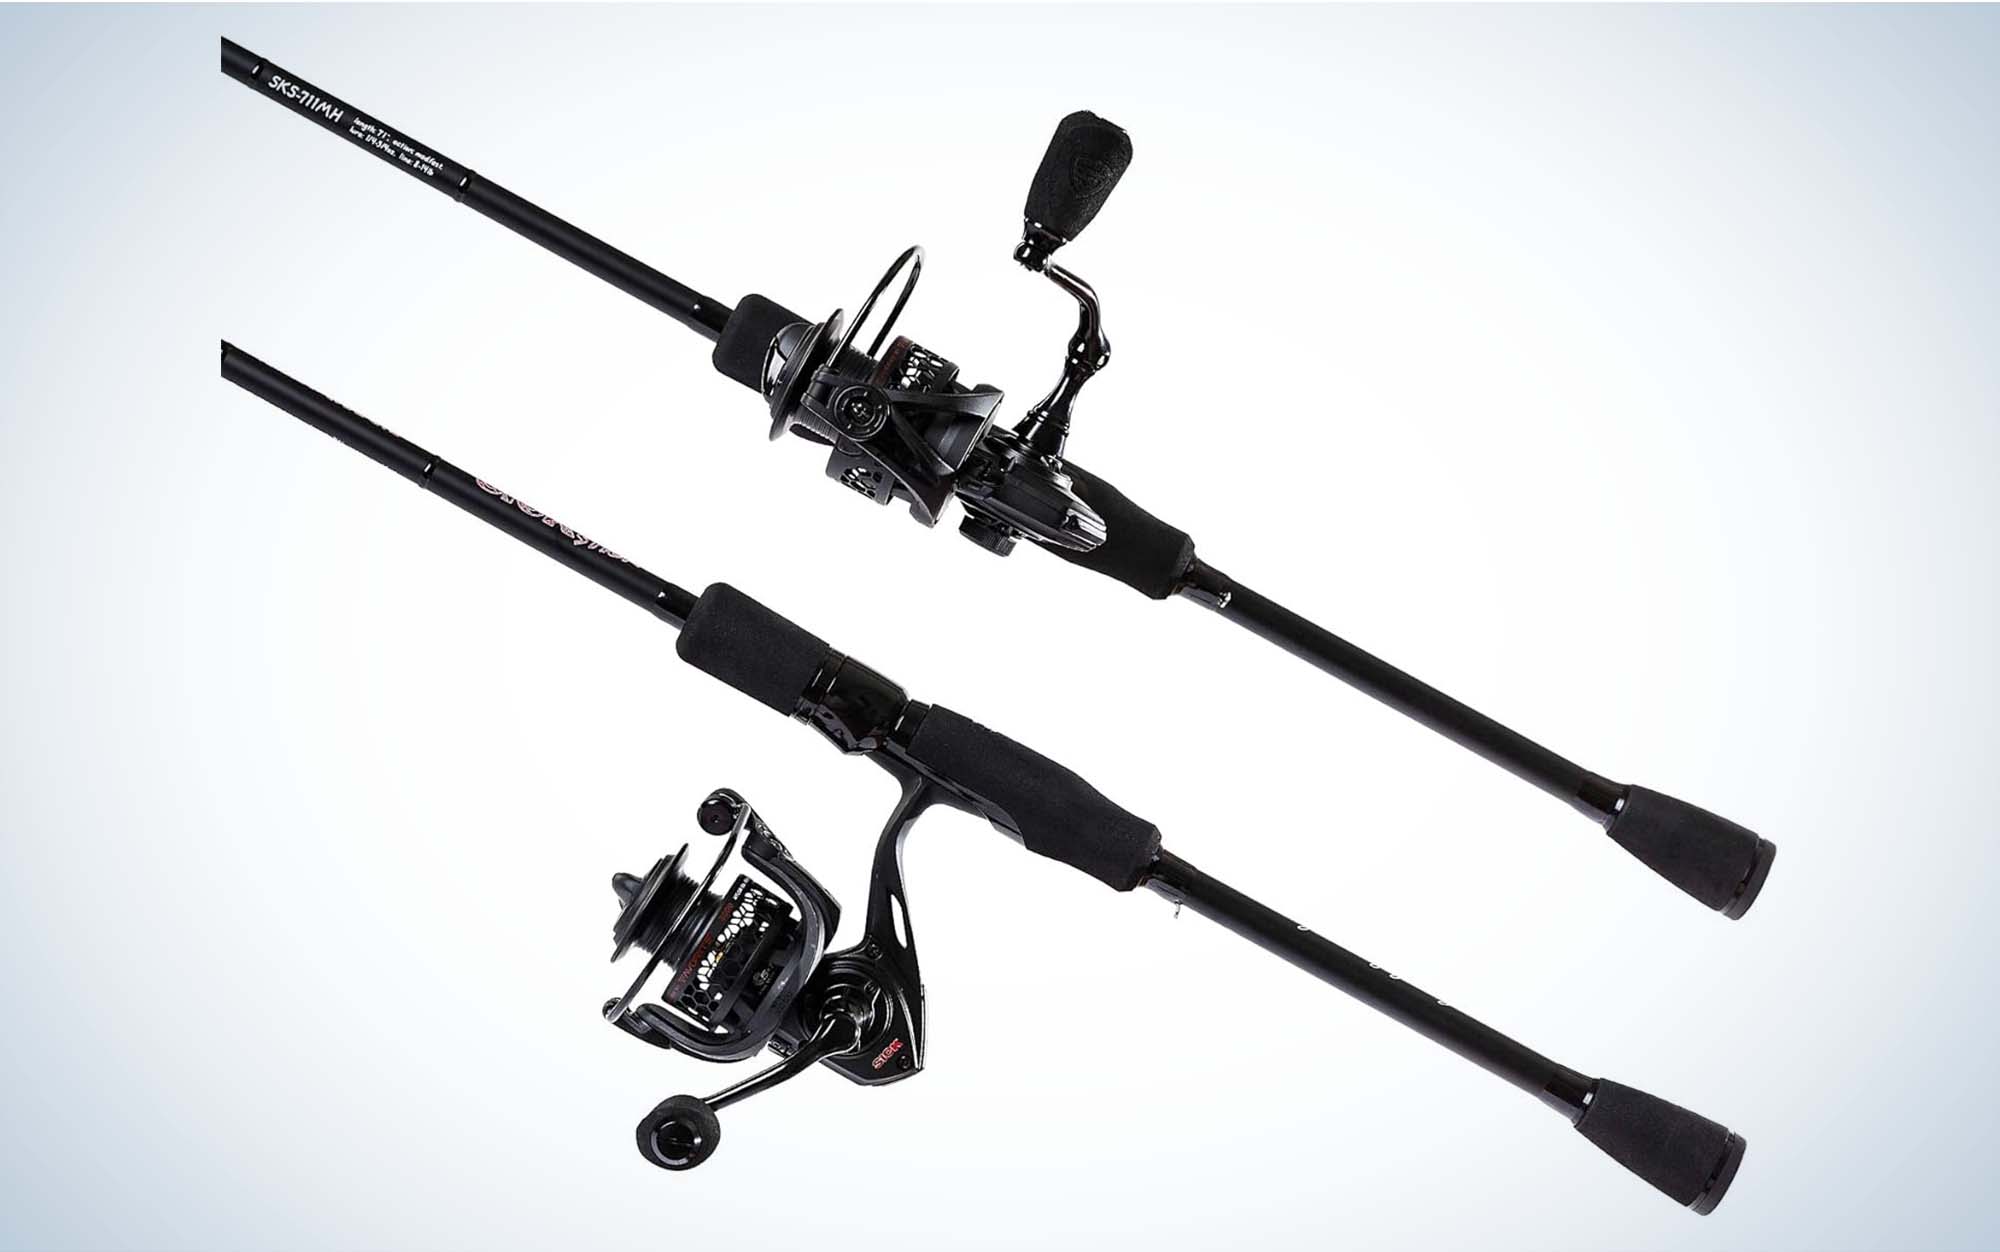 Spinning Rod and Reel Combos